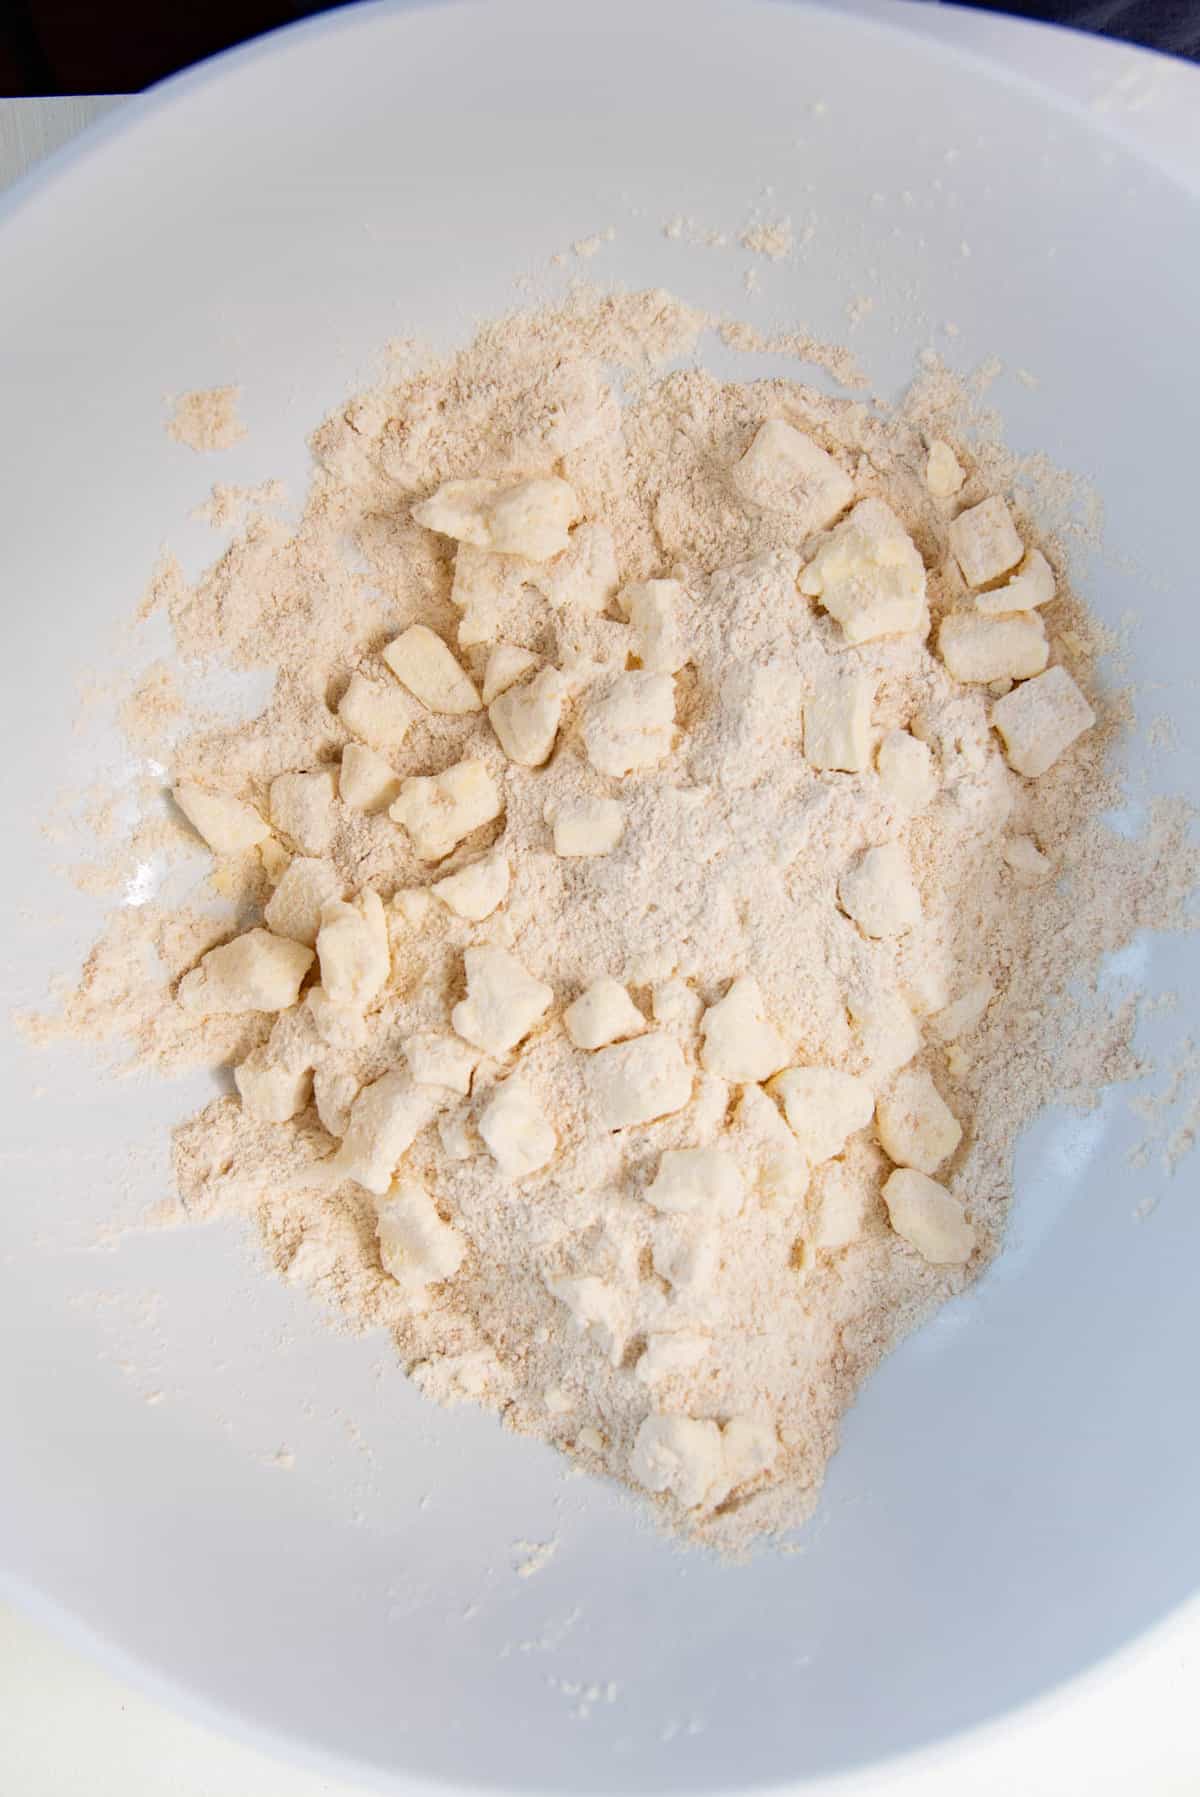 The butter cut into the flour mixture, with large and small lumps of butter in the flour mix.